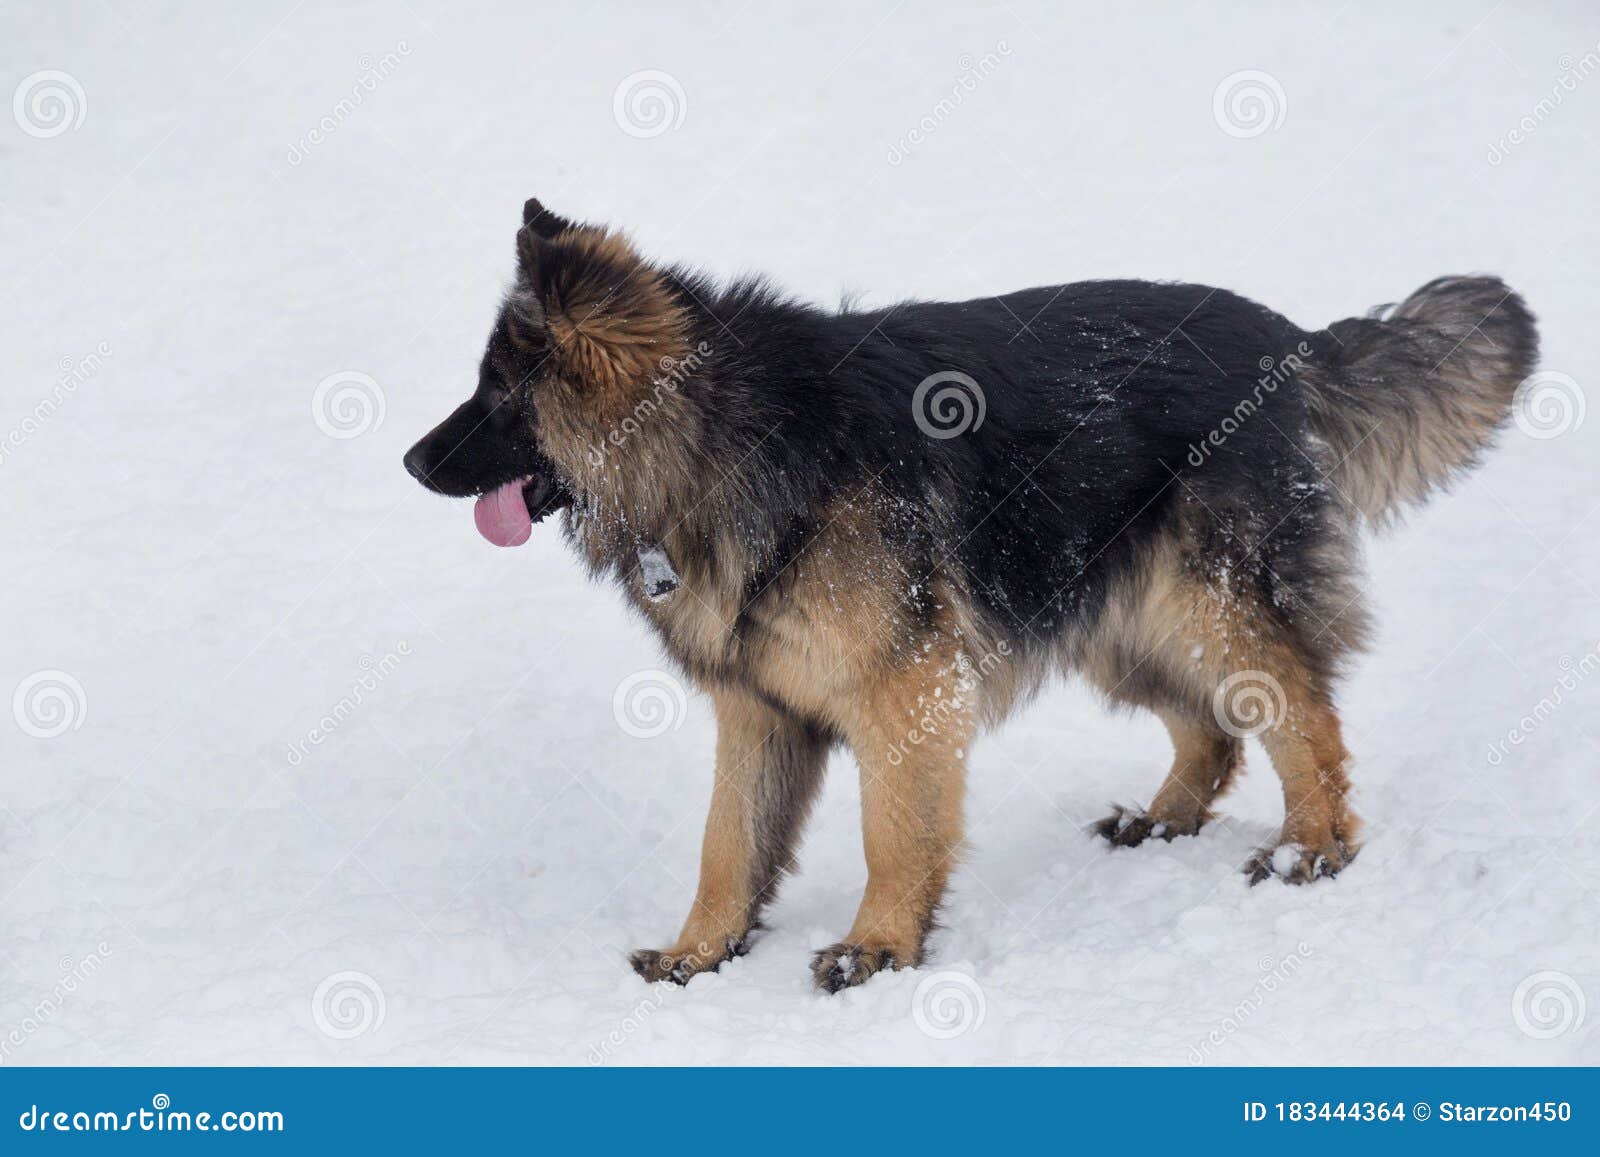 Long Haired German Shepherd Dog Puppy is Standing on a White Snow in the  Winter Park. Pet Animals Stock Photo - Image of black, brown: 183444364